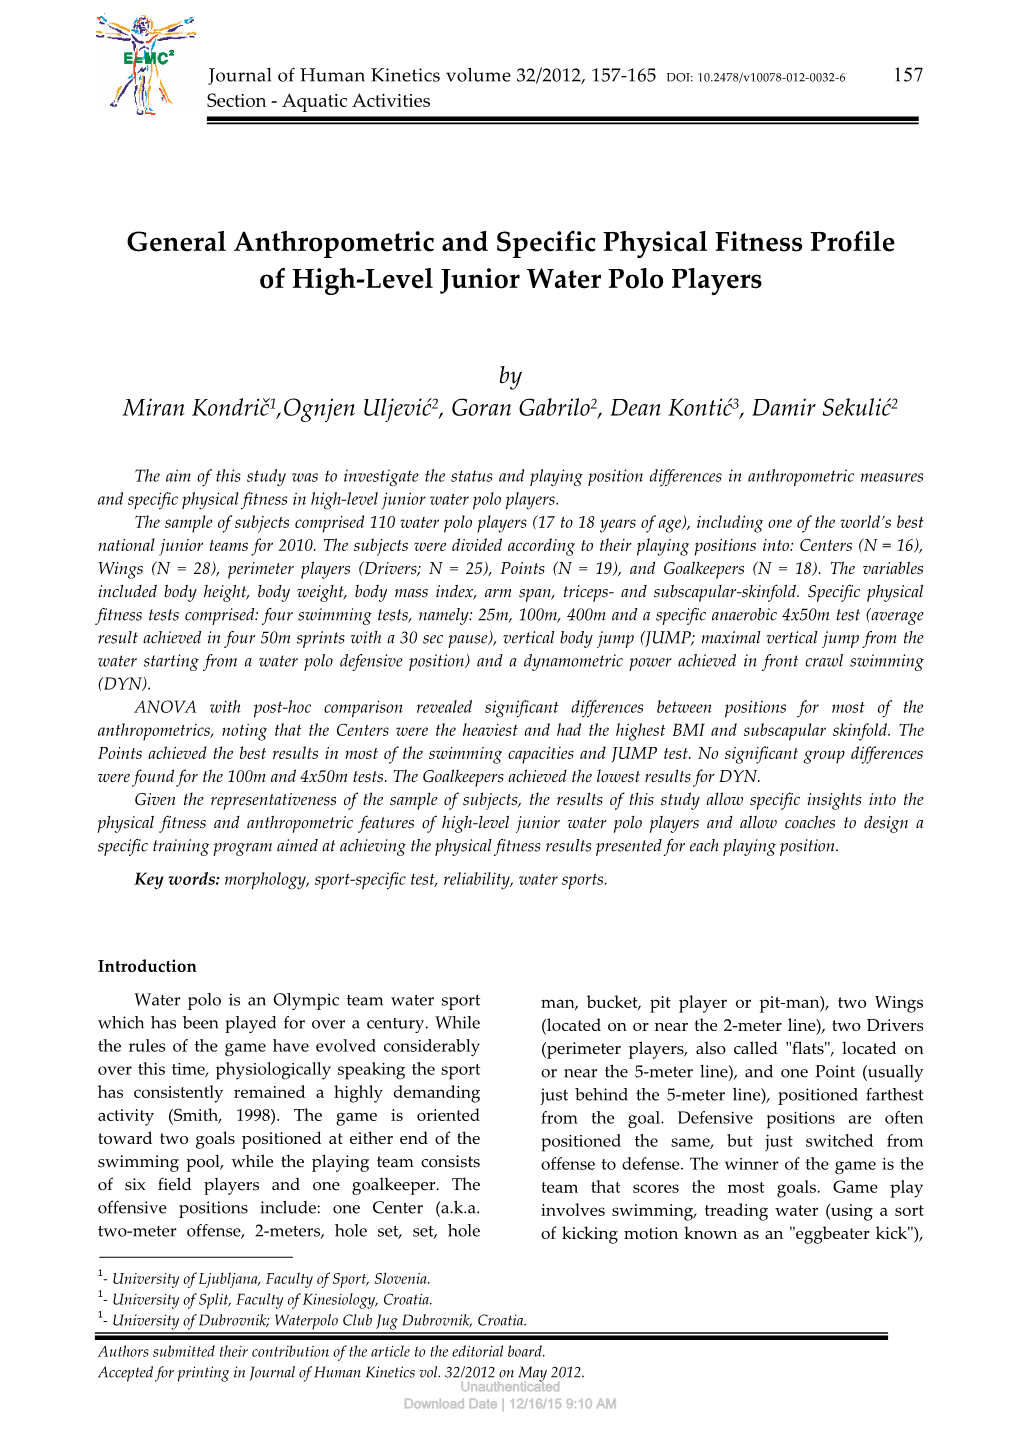 General Anthropometric and Specific Physical Fitness Profile of High-Level Junior Water Polo Players